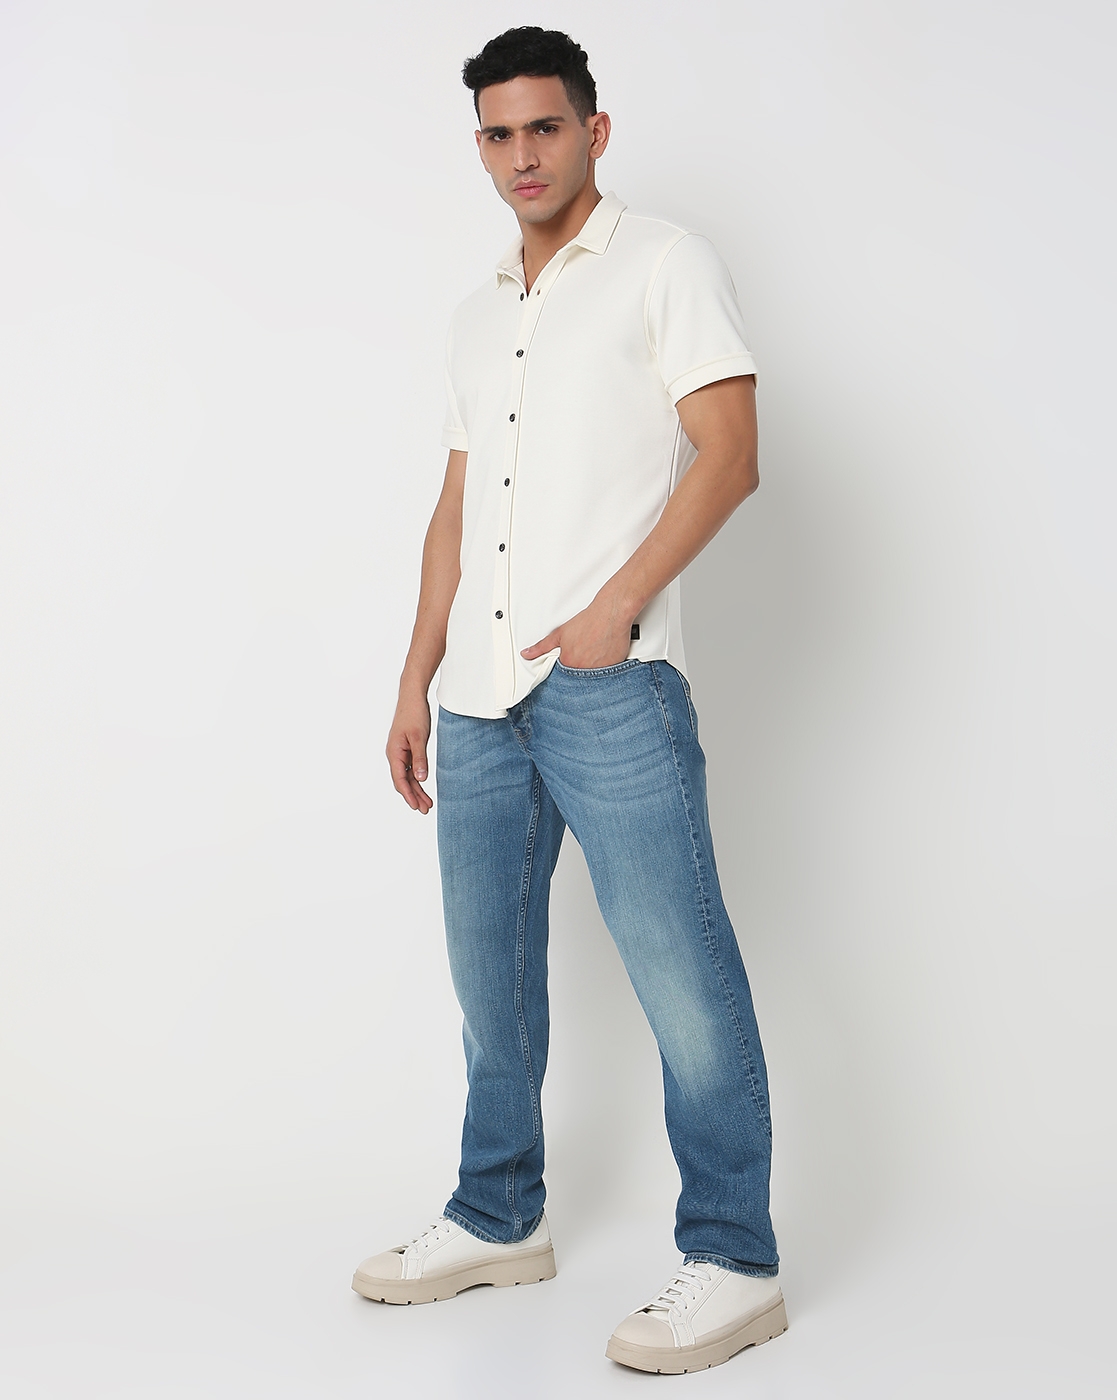 GAS | Slim Fit Solid Short Sleeve Shirt with Classic Collar